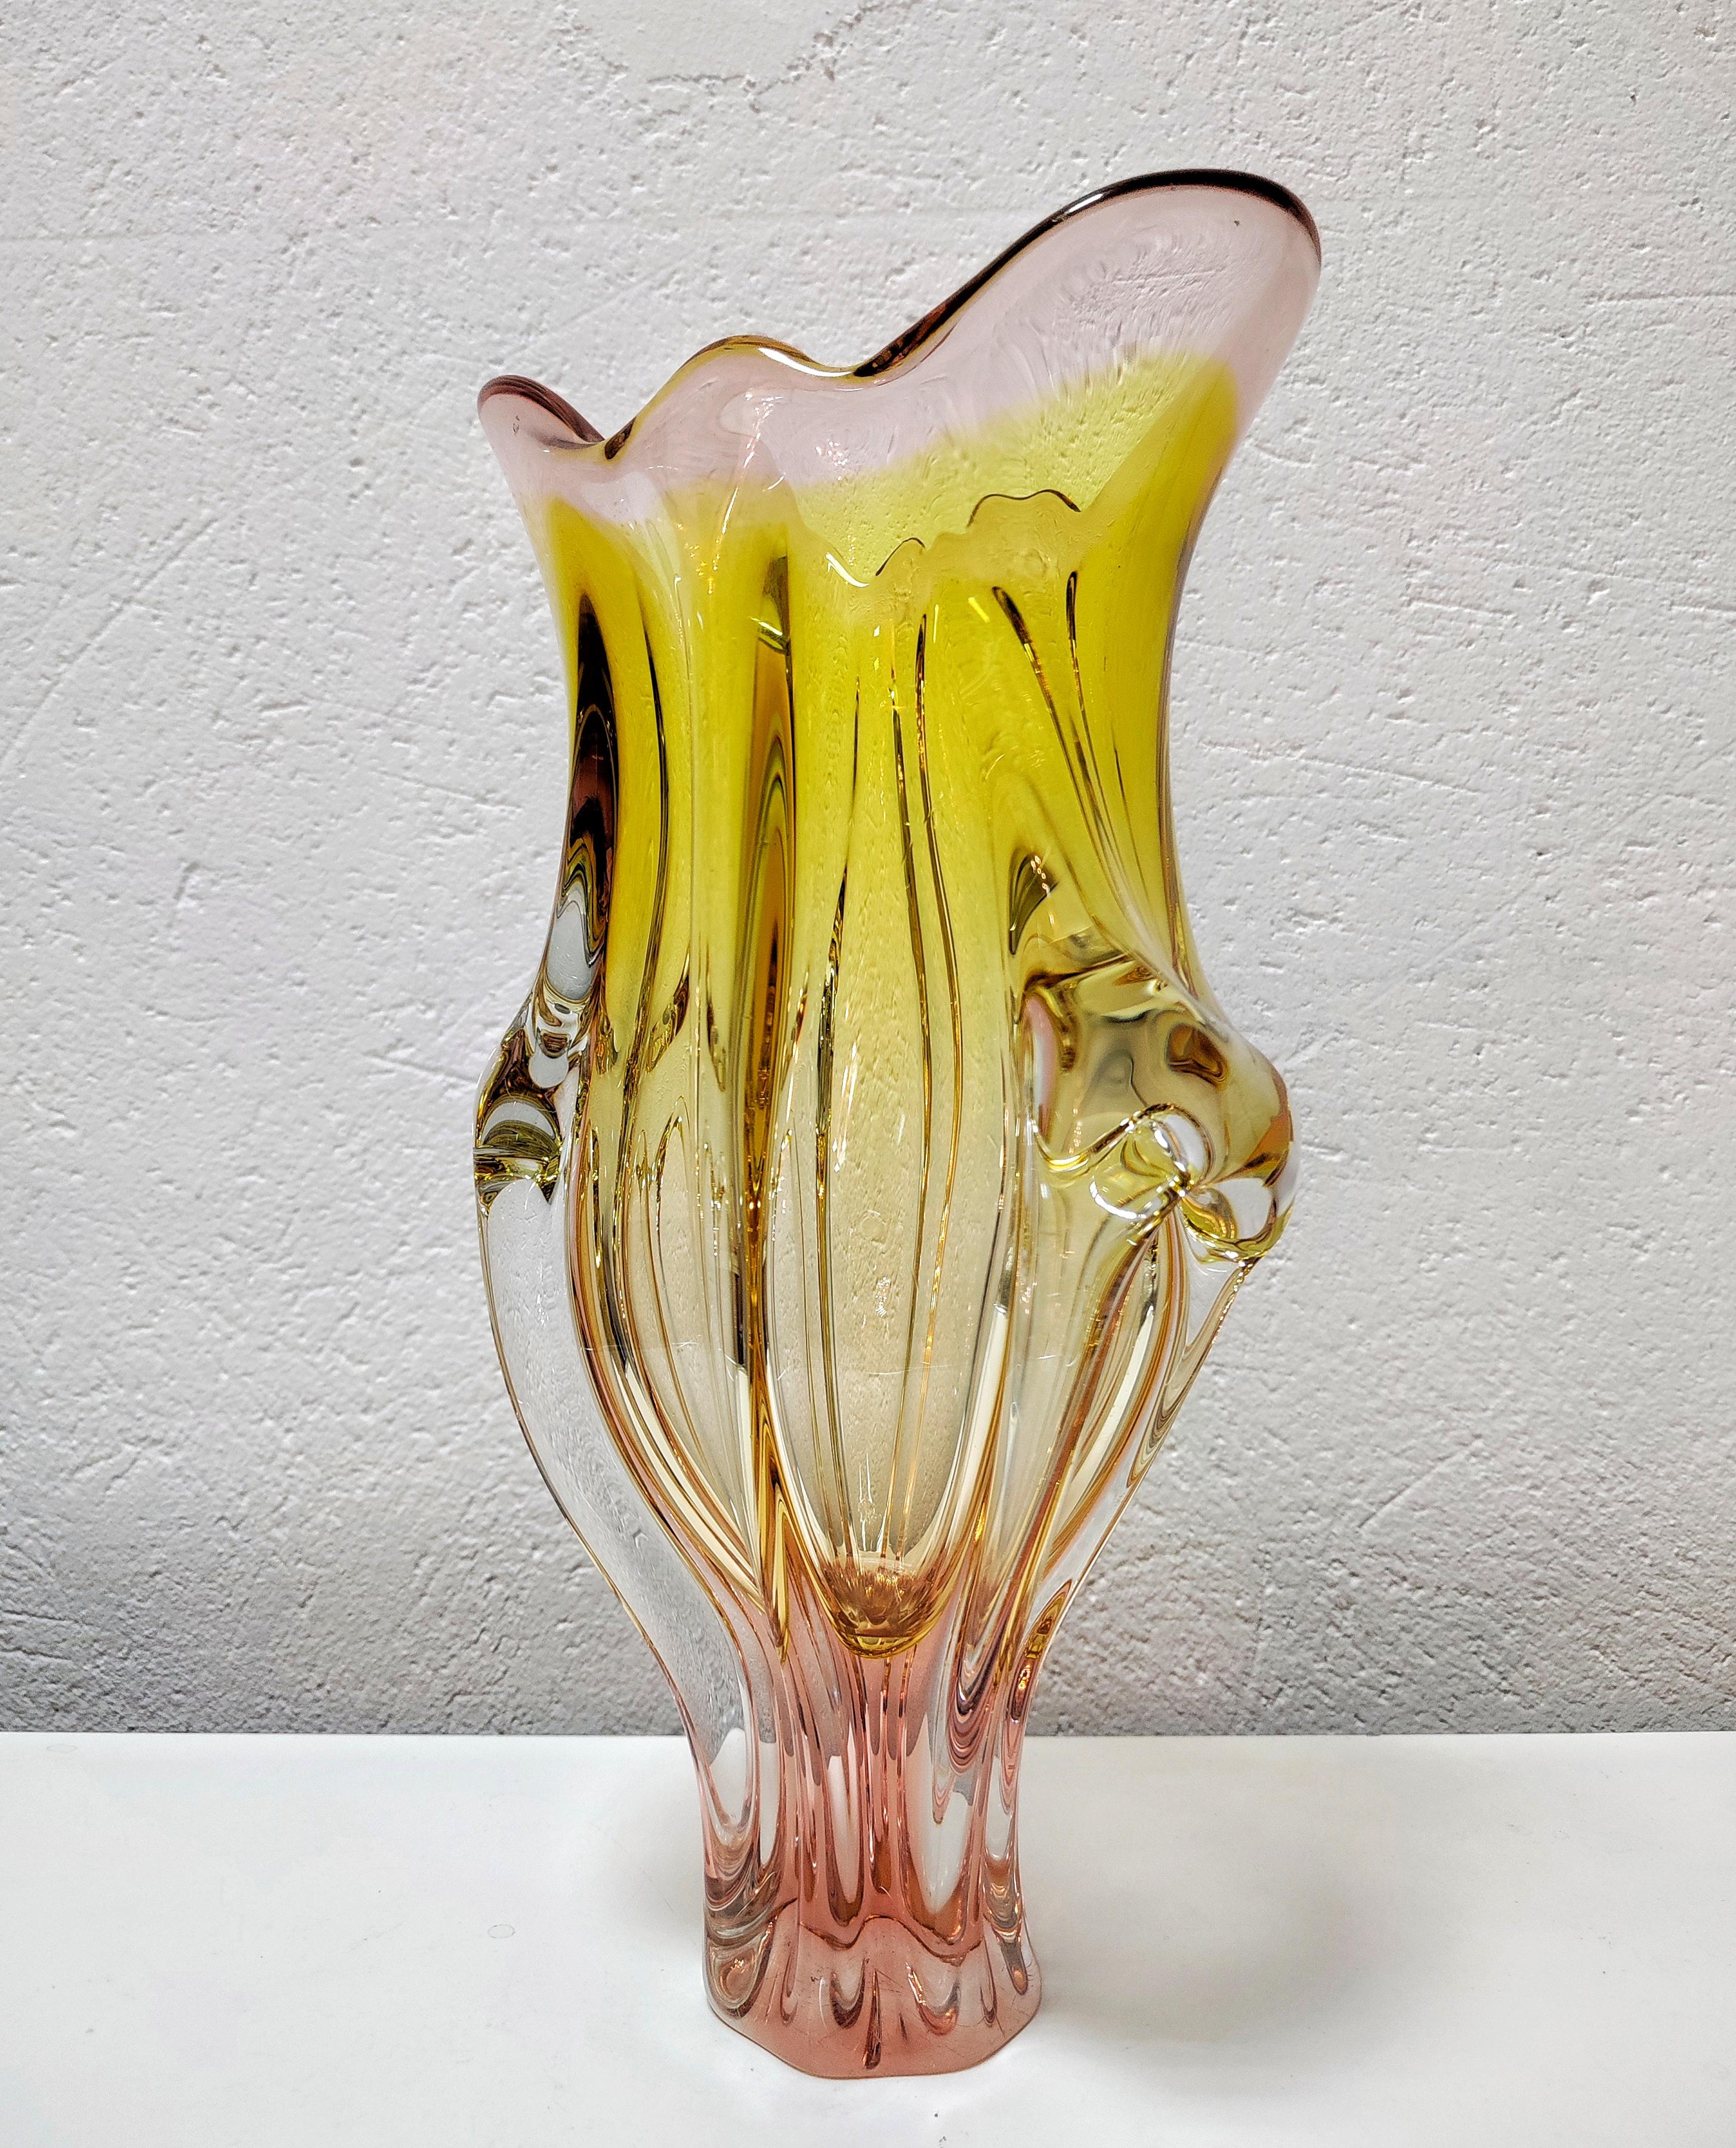 This listing features a large, pink and yellow vase shaped as a flower bud.

It was designed by Josef Hospodka, an artist from Czechoslovakia who was working for glass factory SKLO.

Made in Czechoslovakia. 

Minor signs of use are visible on its